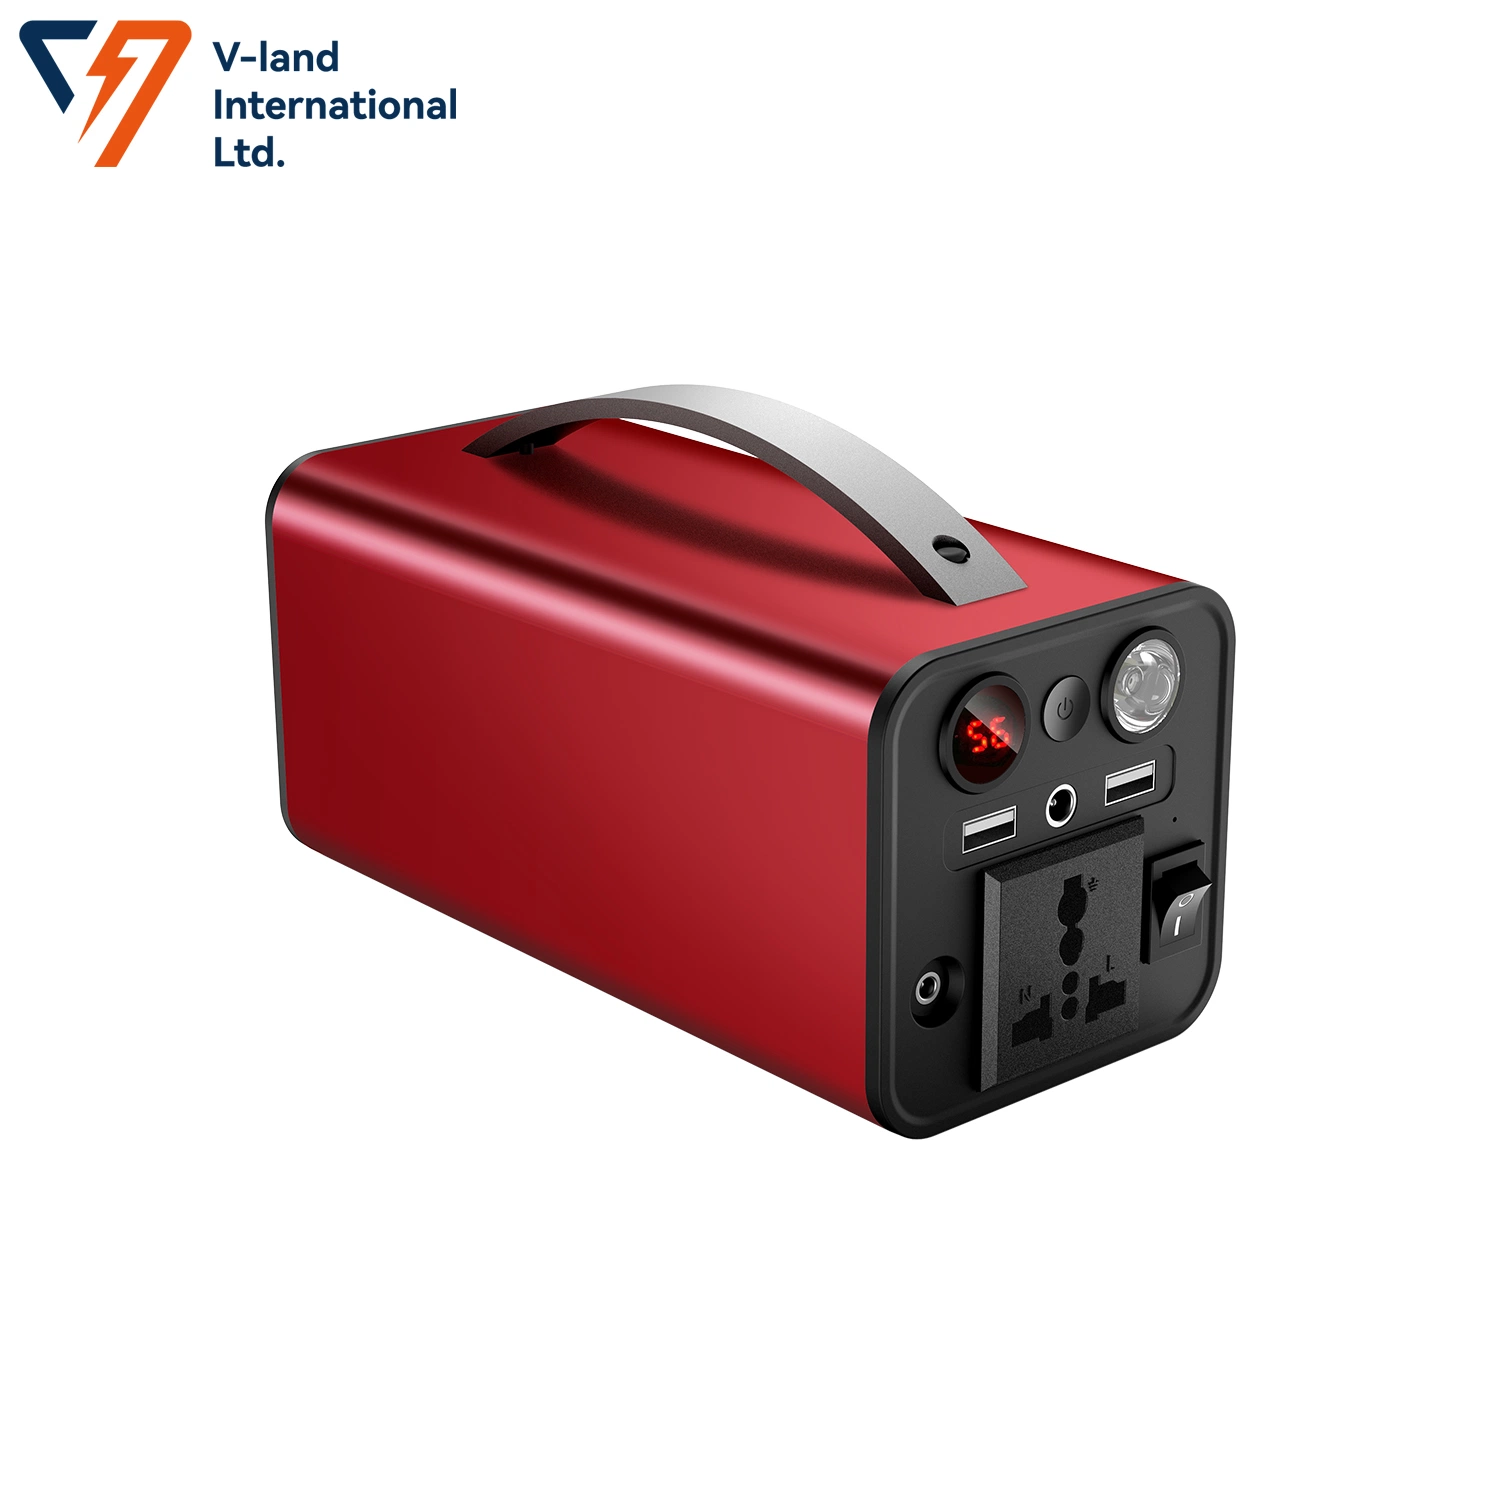 Good Quality Portable Battery Backup Charger Portable Energy Storage for Travel